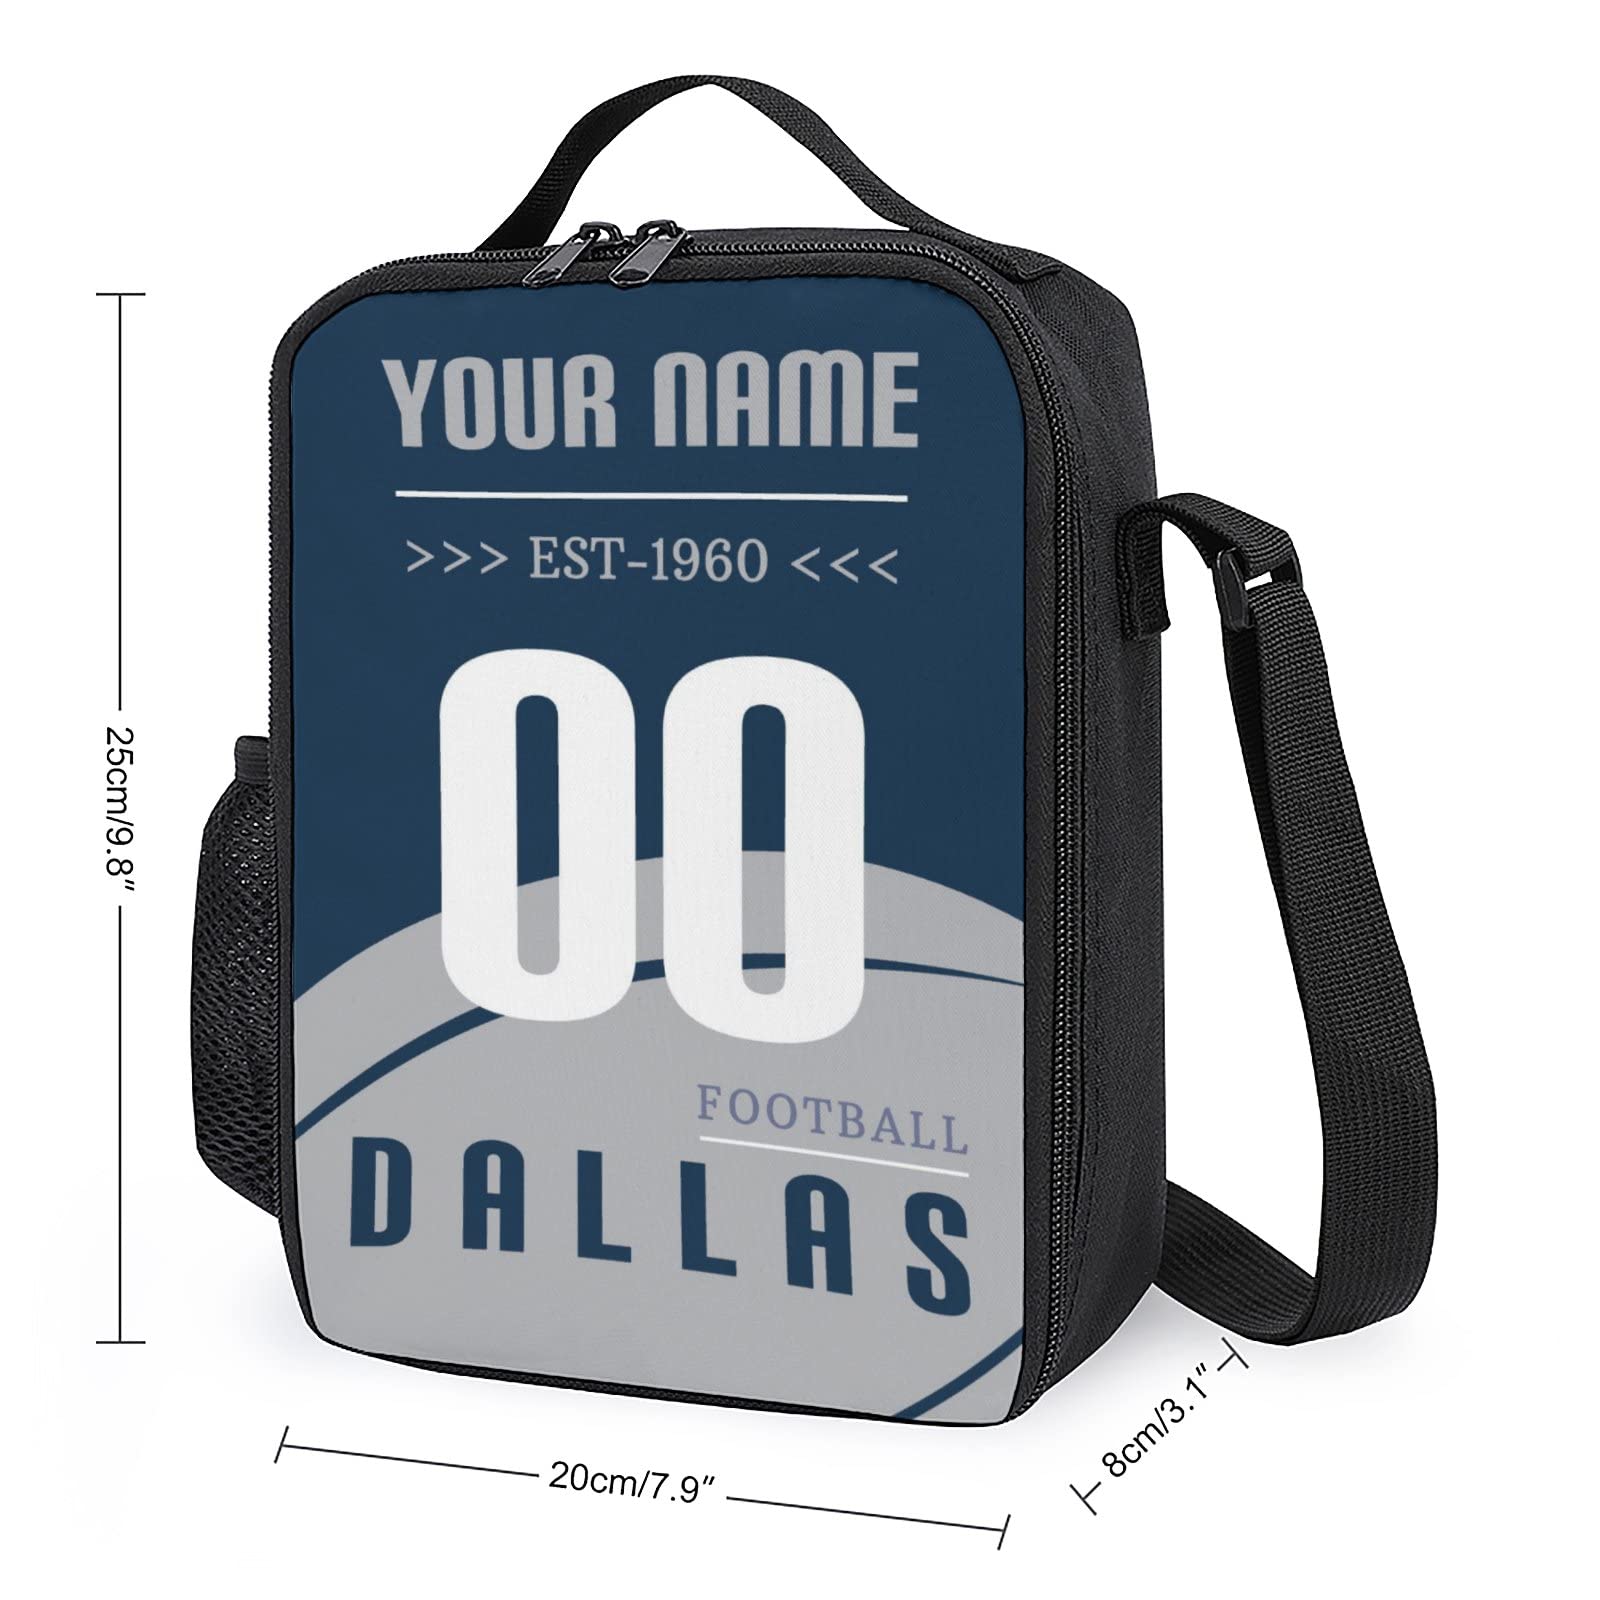 Quzeoxb Custom Dallas Lunch Bag, Personalized Insulated Lunch Box with Adjustable Strap Cooler Bag Gifts for Men Women